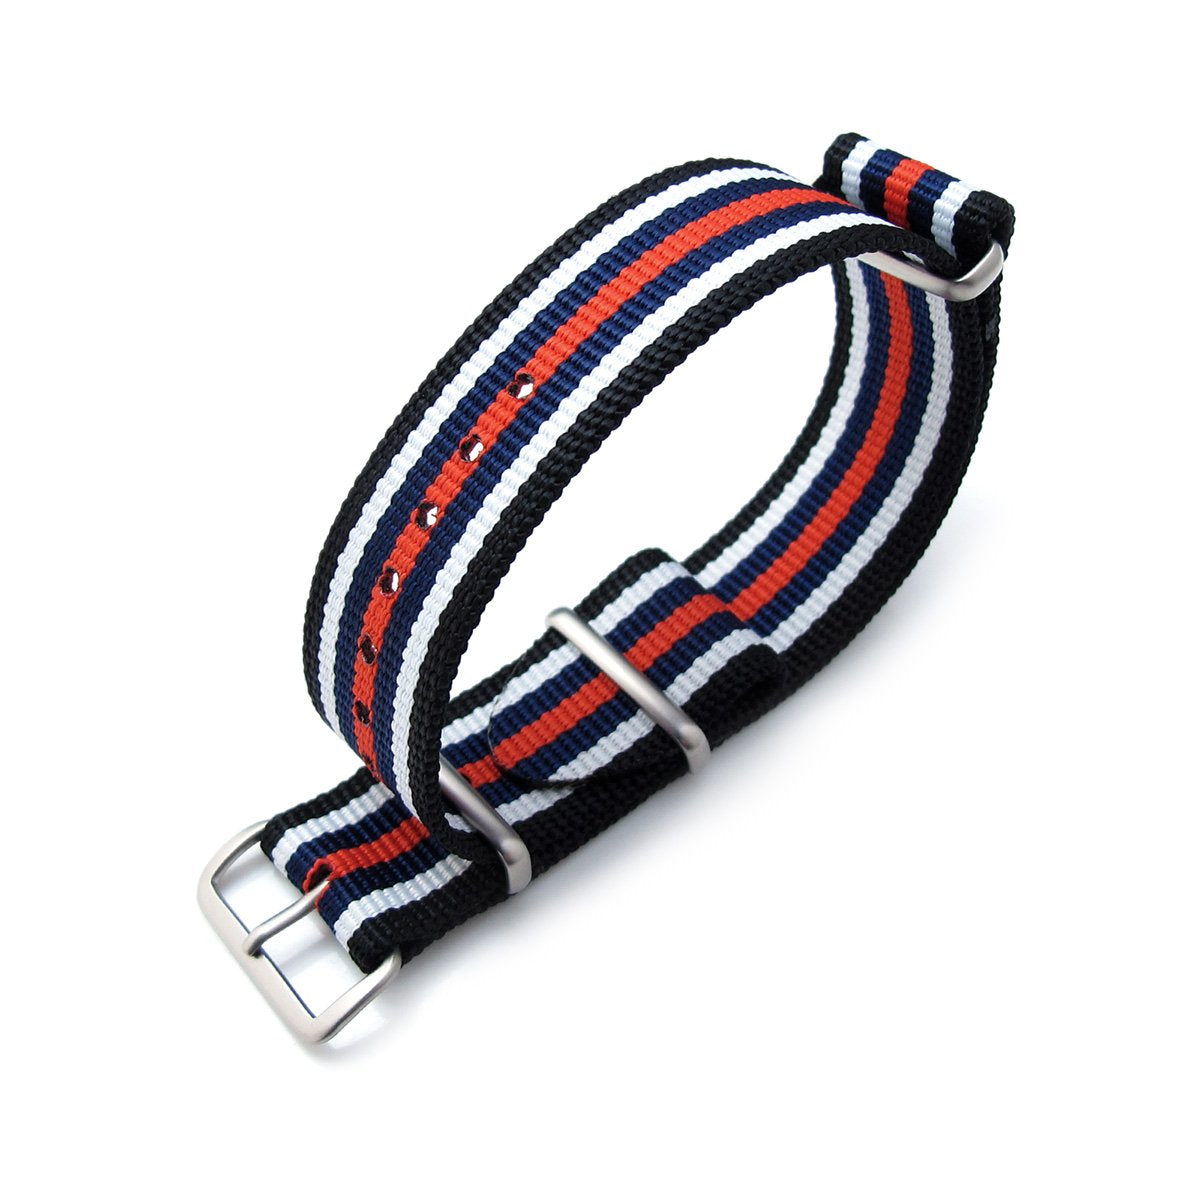 MiLTAT 21mm or 22mm G10 NATO Bullet Tail Watch Strap Ballistic Nylon Brushed Black White Blue &amp; Red Stripes Strapcode Watch Bands